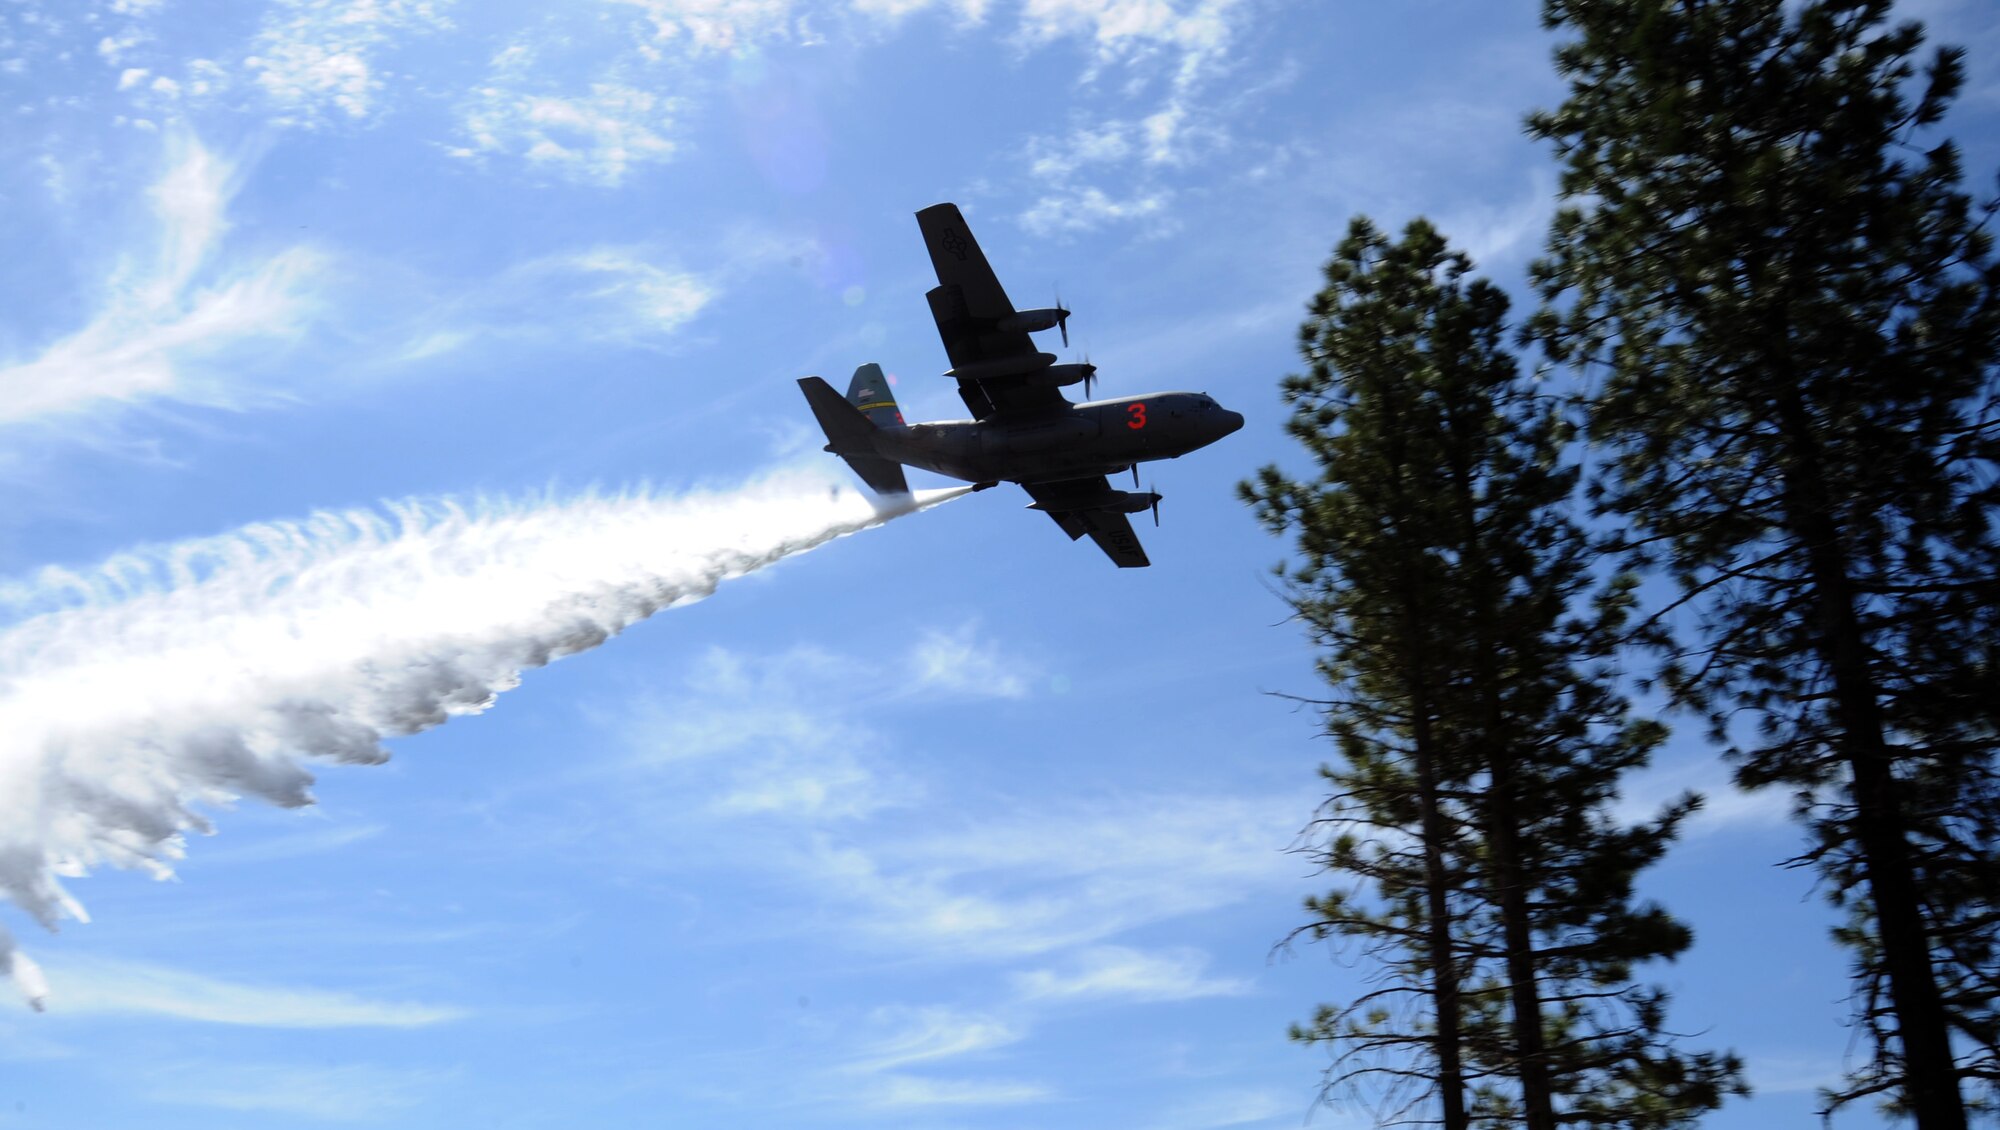 A C-130 Hercules aircraft equipped with a U.S. Department of Agriculture Forest Service Modular Airborne Fire Fighting System drops water over the Tahoe National Forest, California, April 26, 2018.